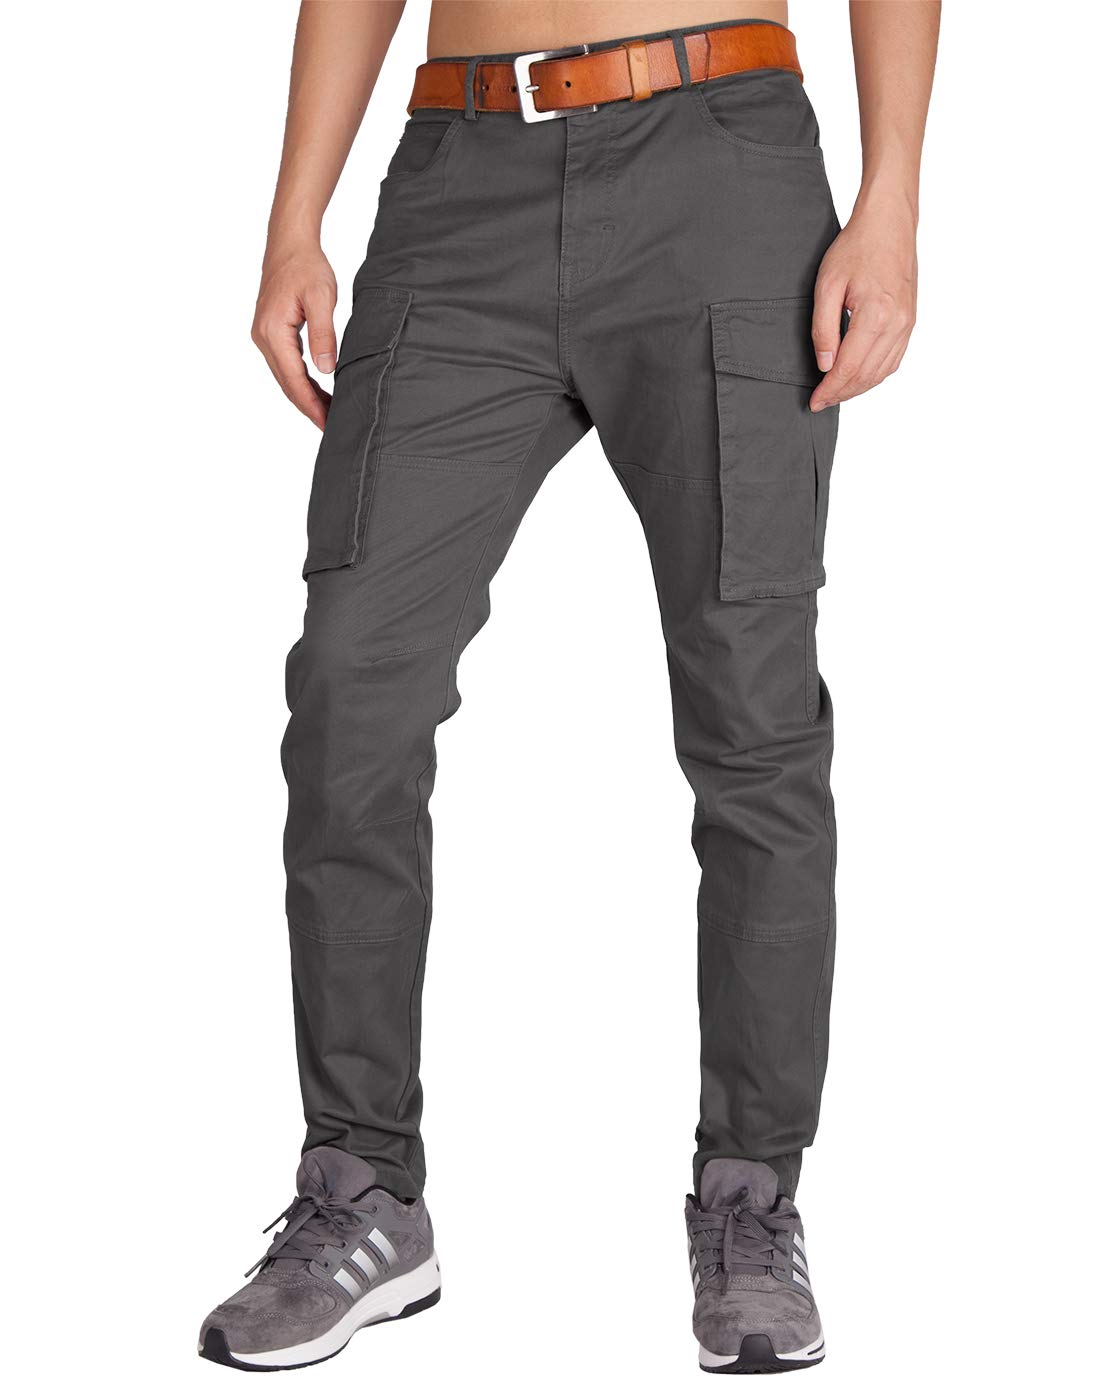 ITALYMORN Mens Black Work Cargo Joggers with Deep Pockets Casual